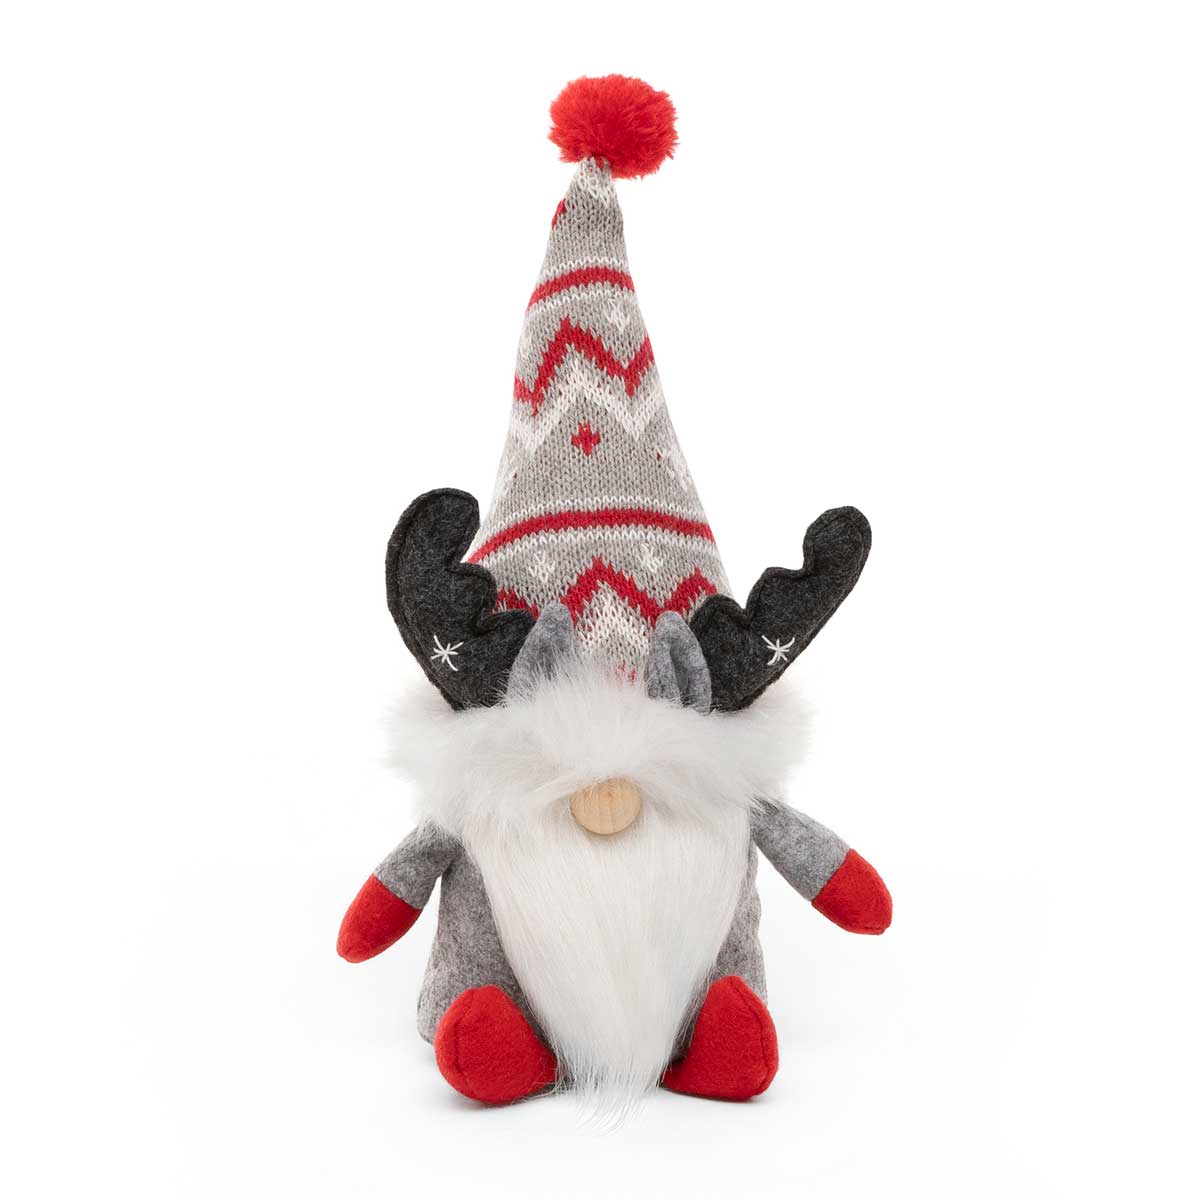 Gnome with Grey moose antlers